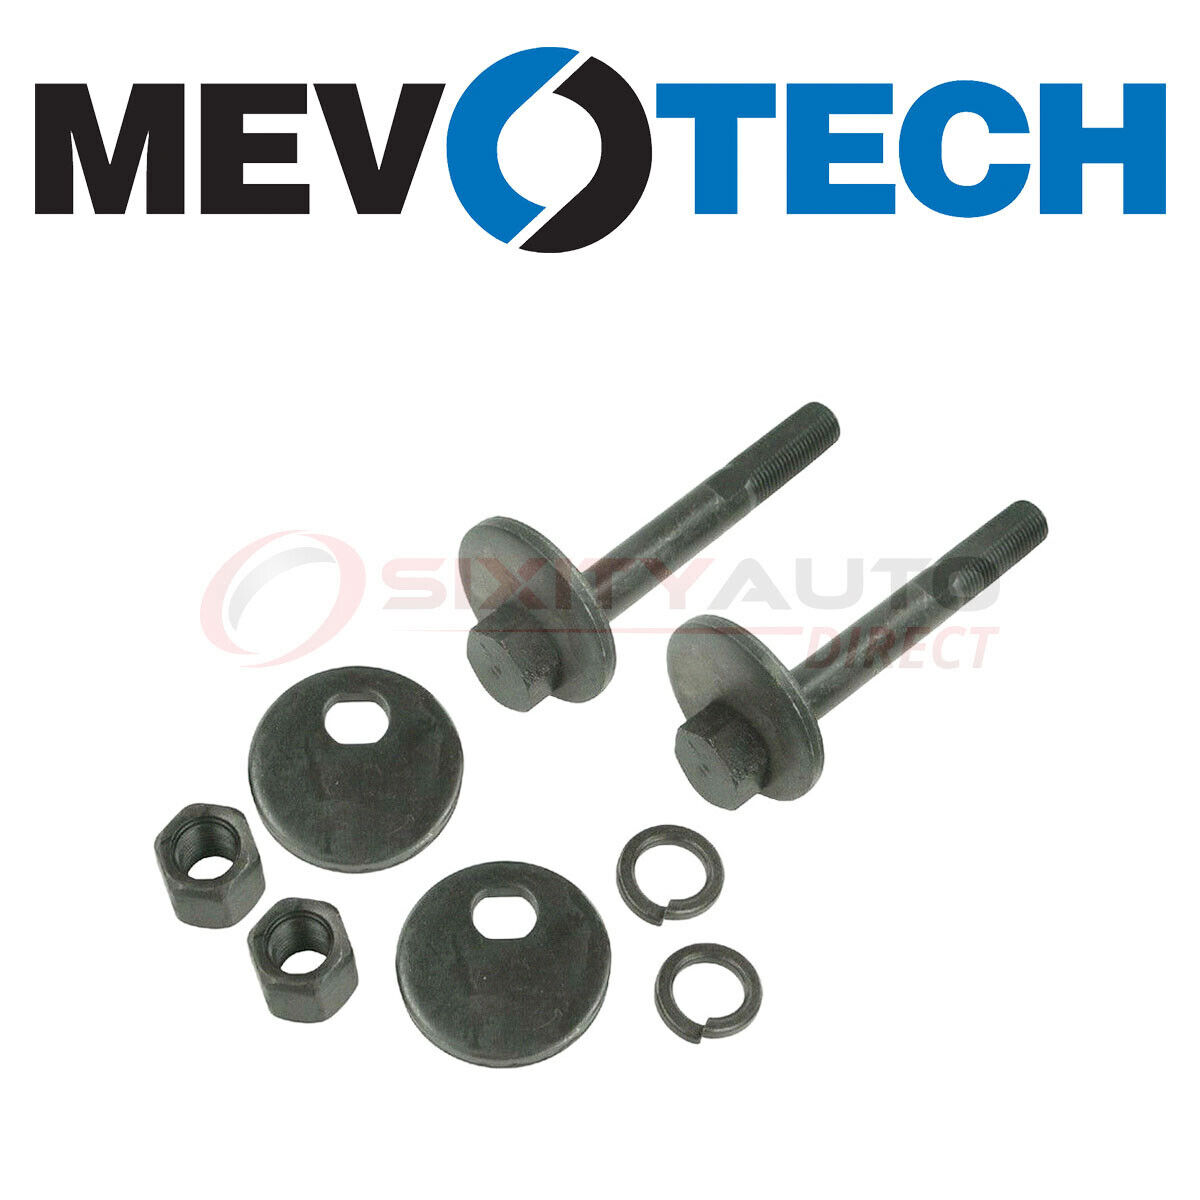 Mevotech Alignment Camber Kit for 1965-1976 Plymouth Valiant 2.8L 3.2L 3.7L hj